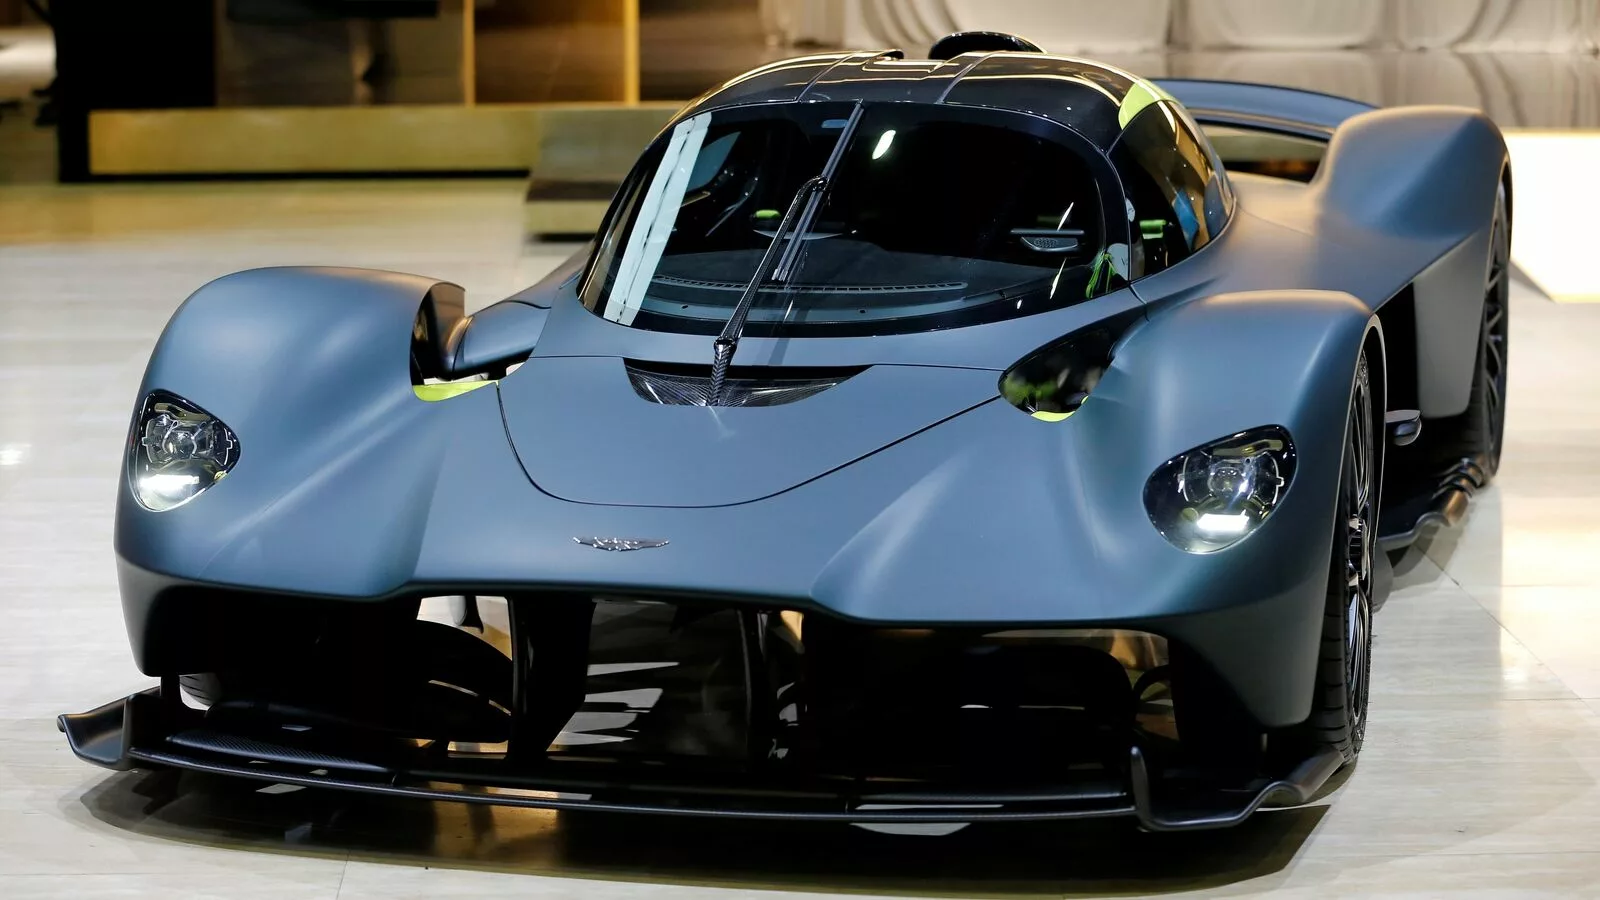 This hypercar's maintenance cost is a whopping ₹1.25 crore a year